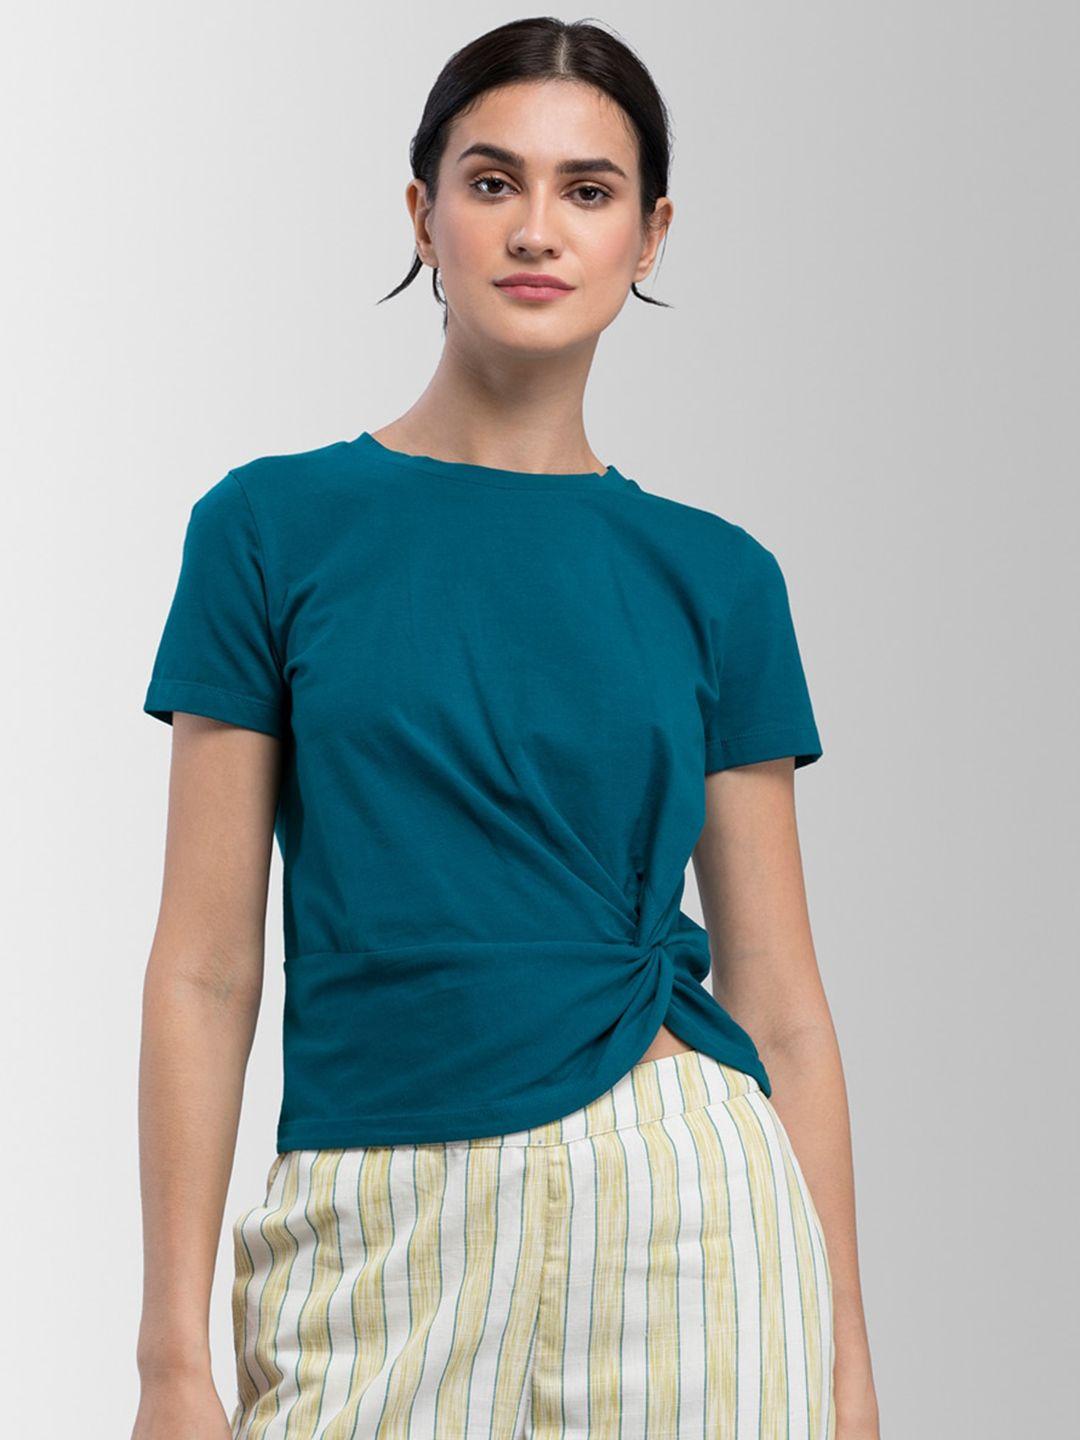 fablestreet women teal blue solid twisted top